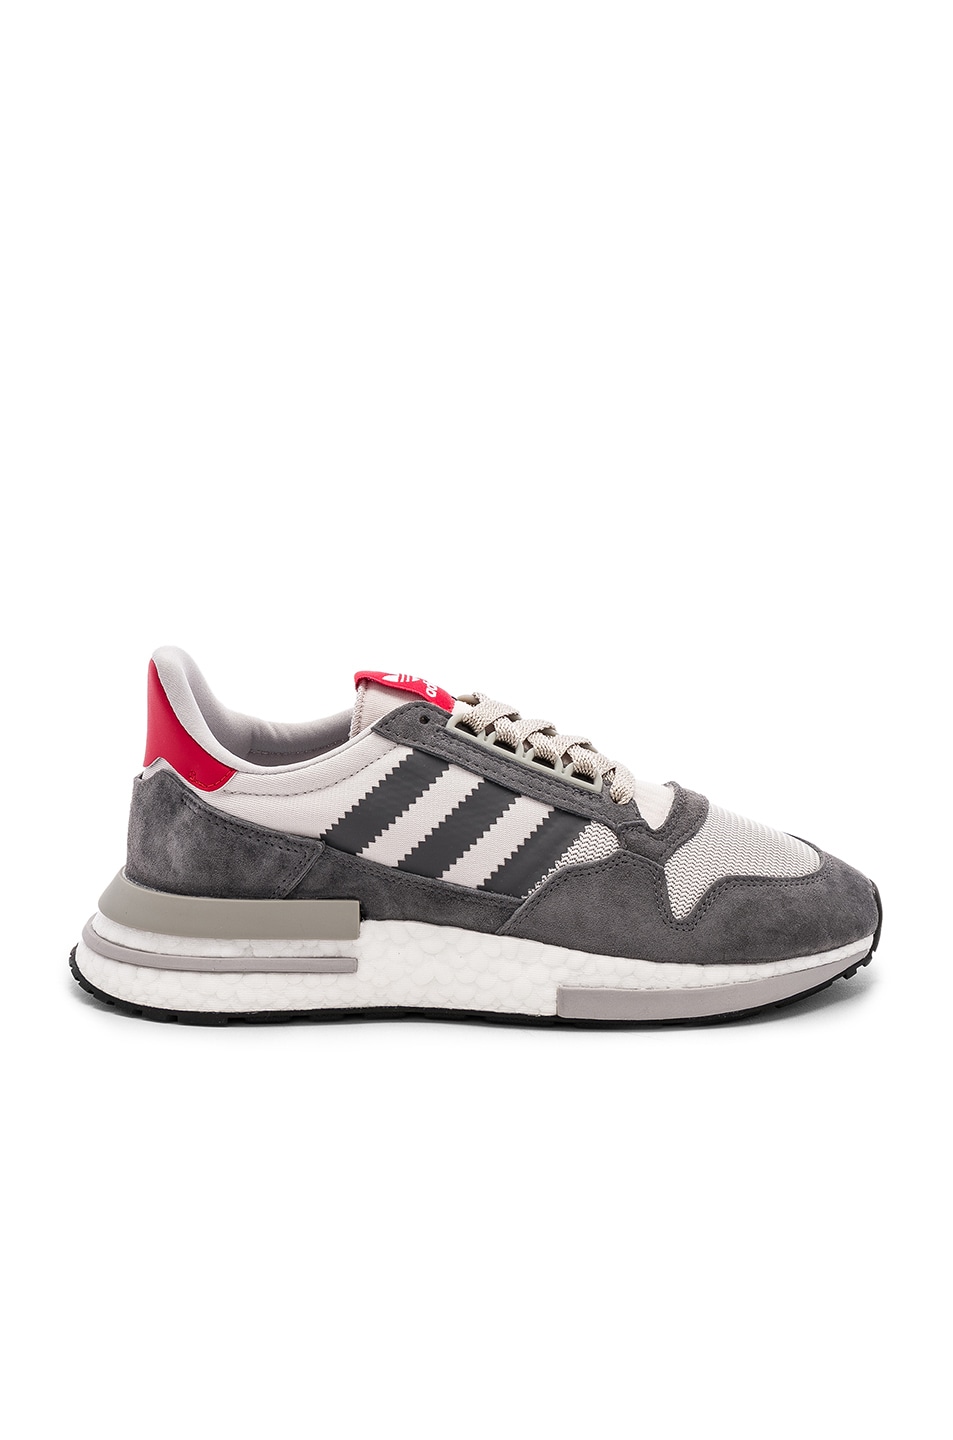 Image 1 of adidas Originals ZX 500 RM in Grey Four & White & Scarlet